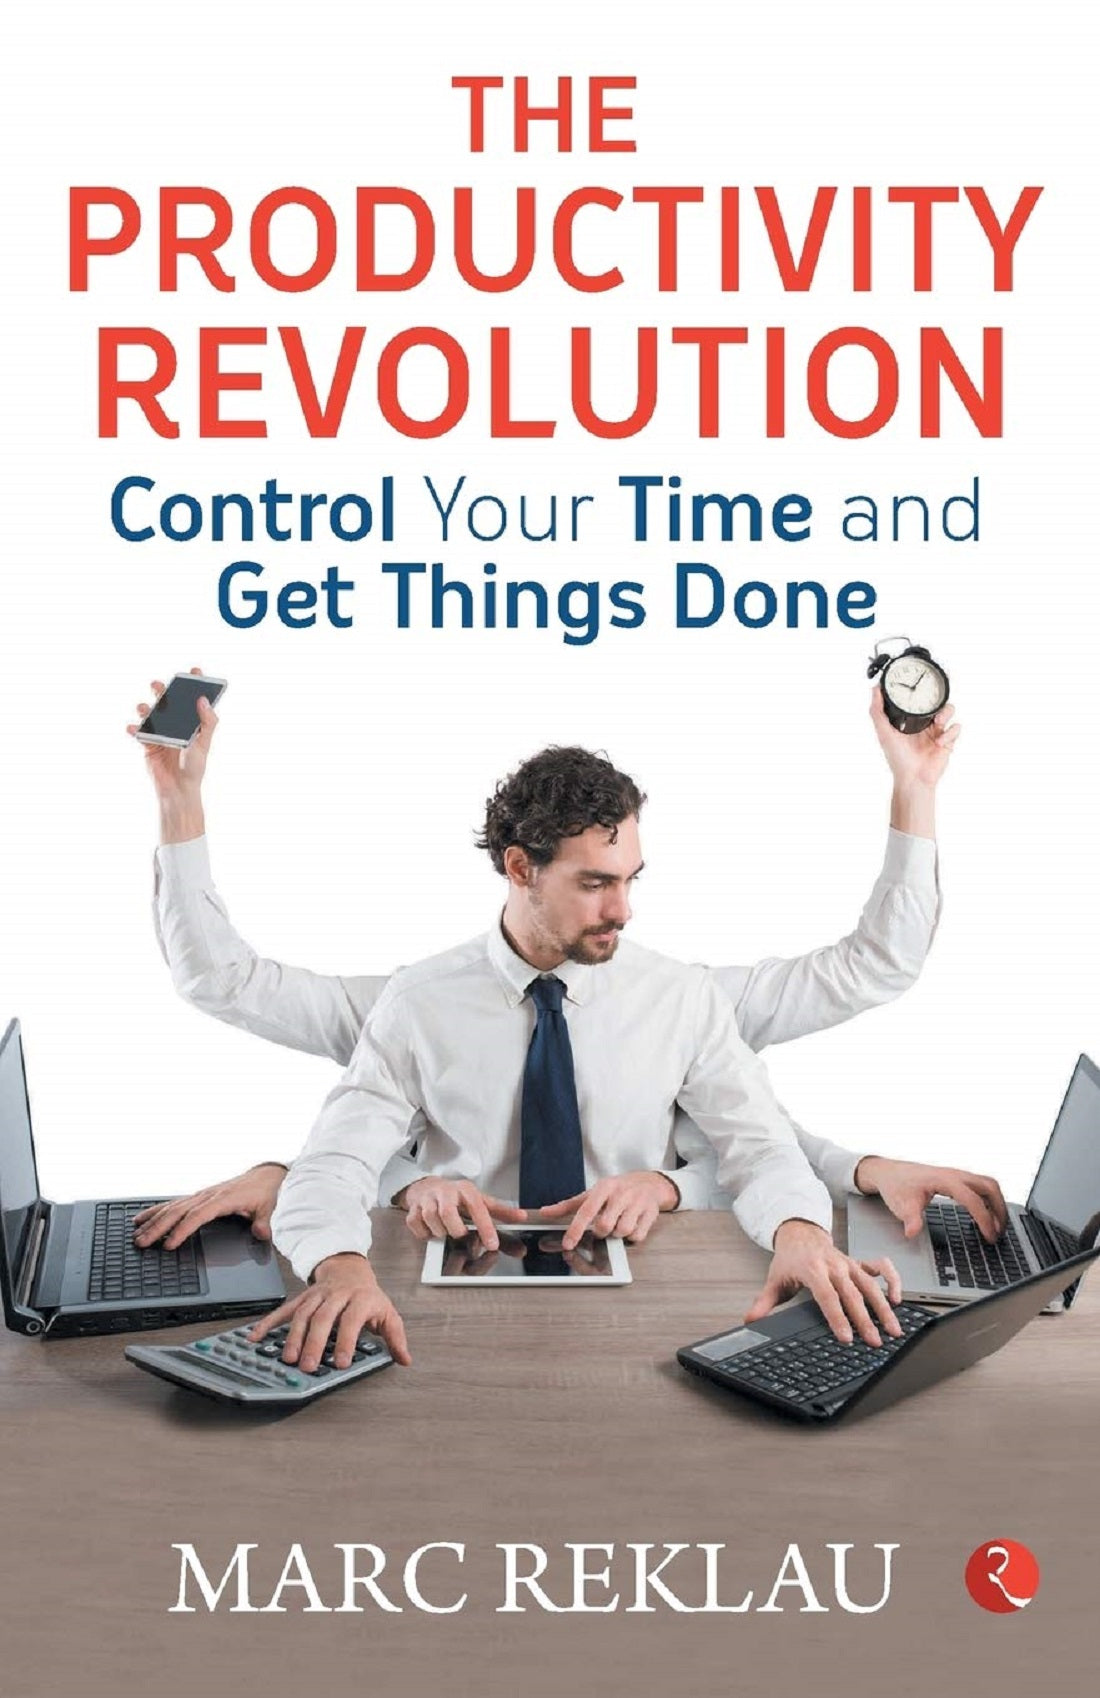 THE PRODUCTIVITY REVOLUTION CONTROL YOUR TIME